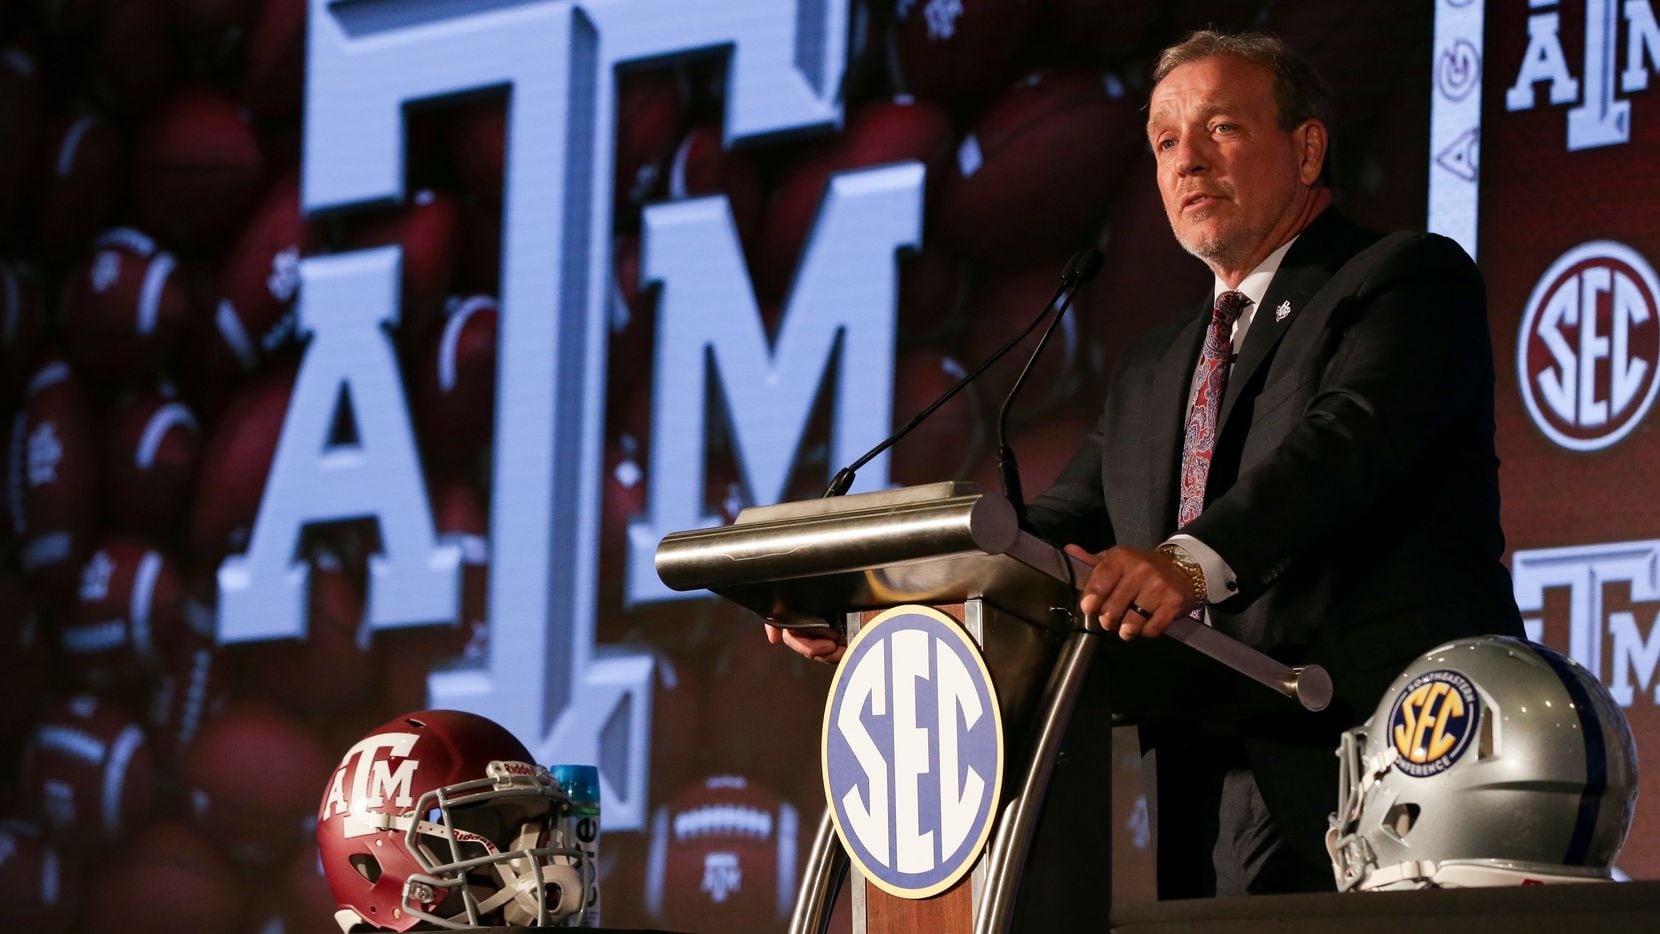 Texas A&M head coach Jimbo Fisher speaks to reporters during an NCAA college football news conference at the Southeastern Conference media days, Wednesday, July 21, 2021, in Hoover, Ala.